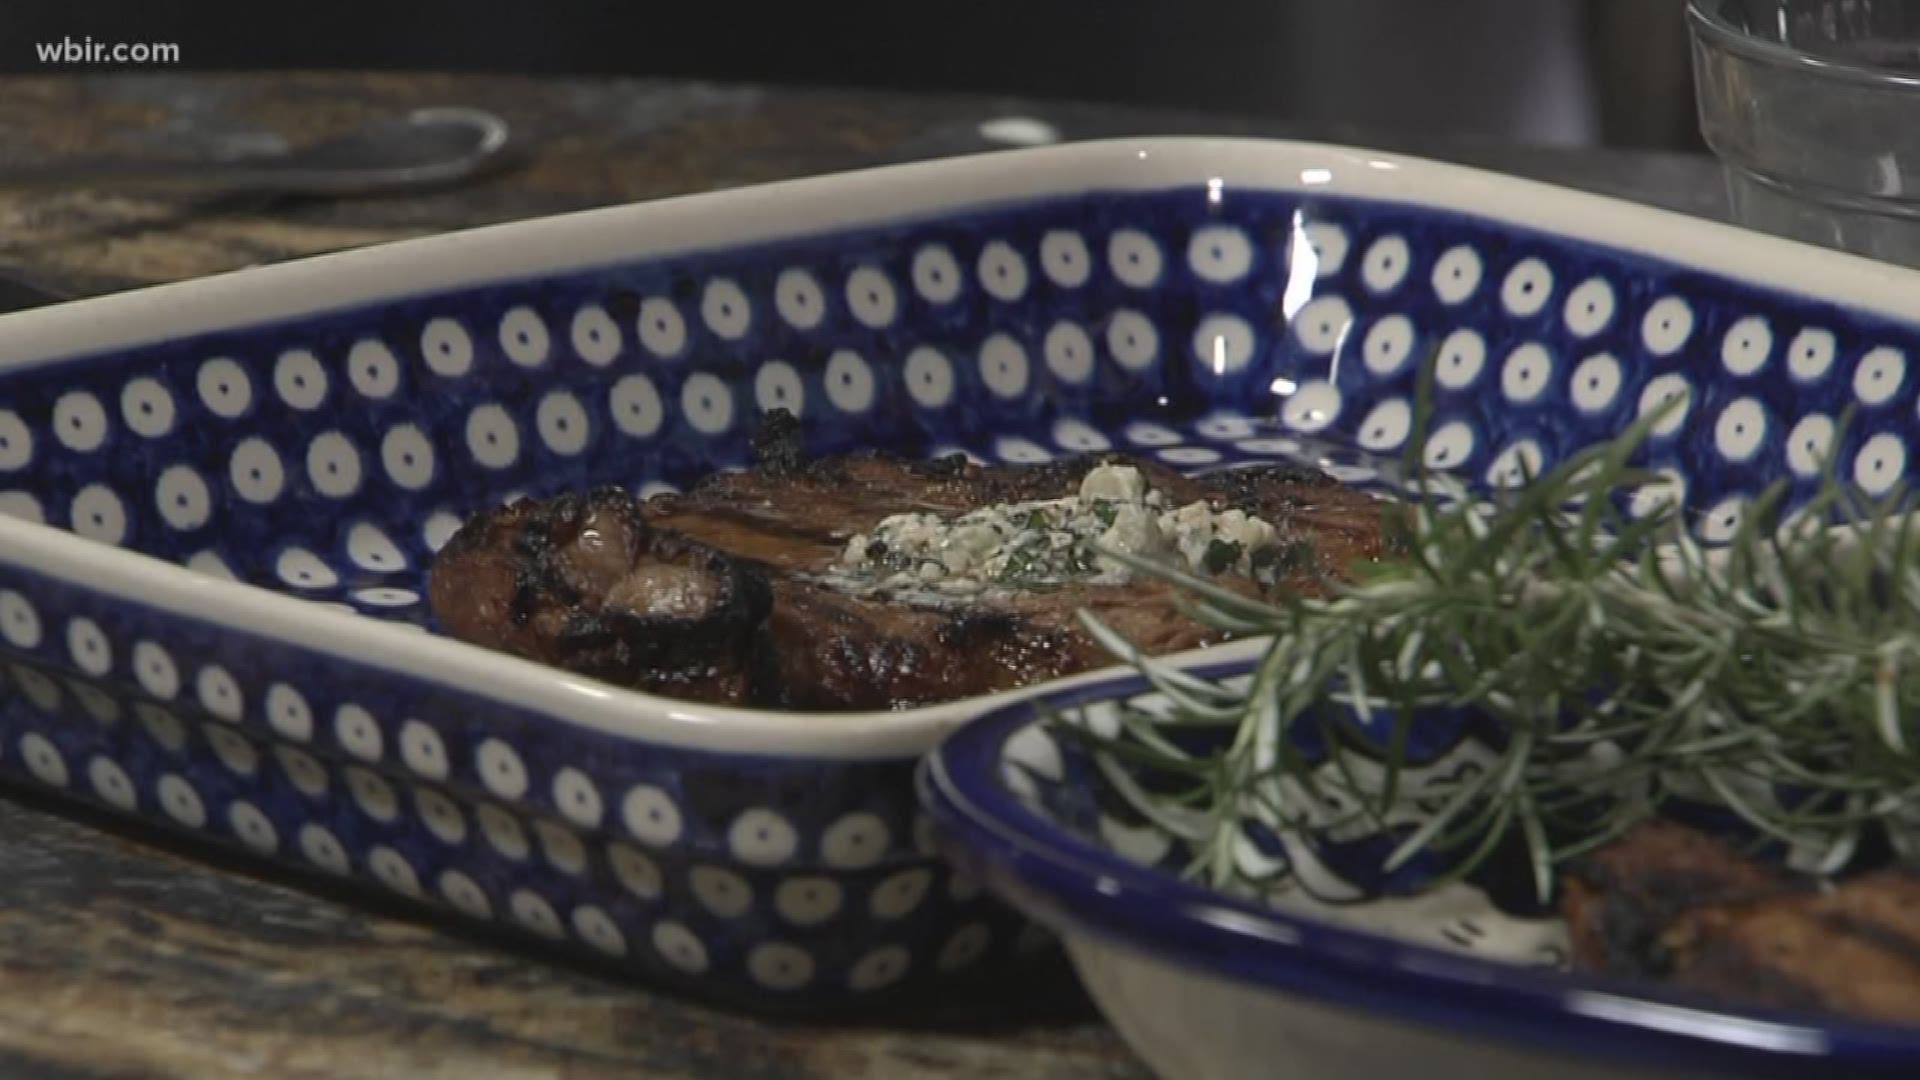 Joy McCabe is always finding a great recipe to try. The expert tailgater and all around great cook is sharing 2 recipes for 'Steak Butter'. These butters, when melted on top of a grilled steak makes them even more delicious. For more of Joy's recipes visit joymccabe.com. May 14, 2019-4pm.